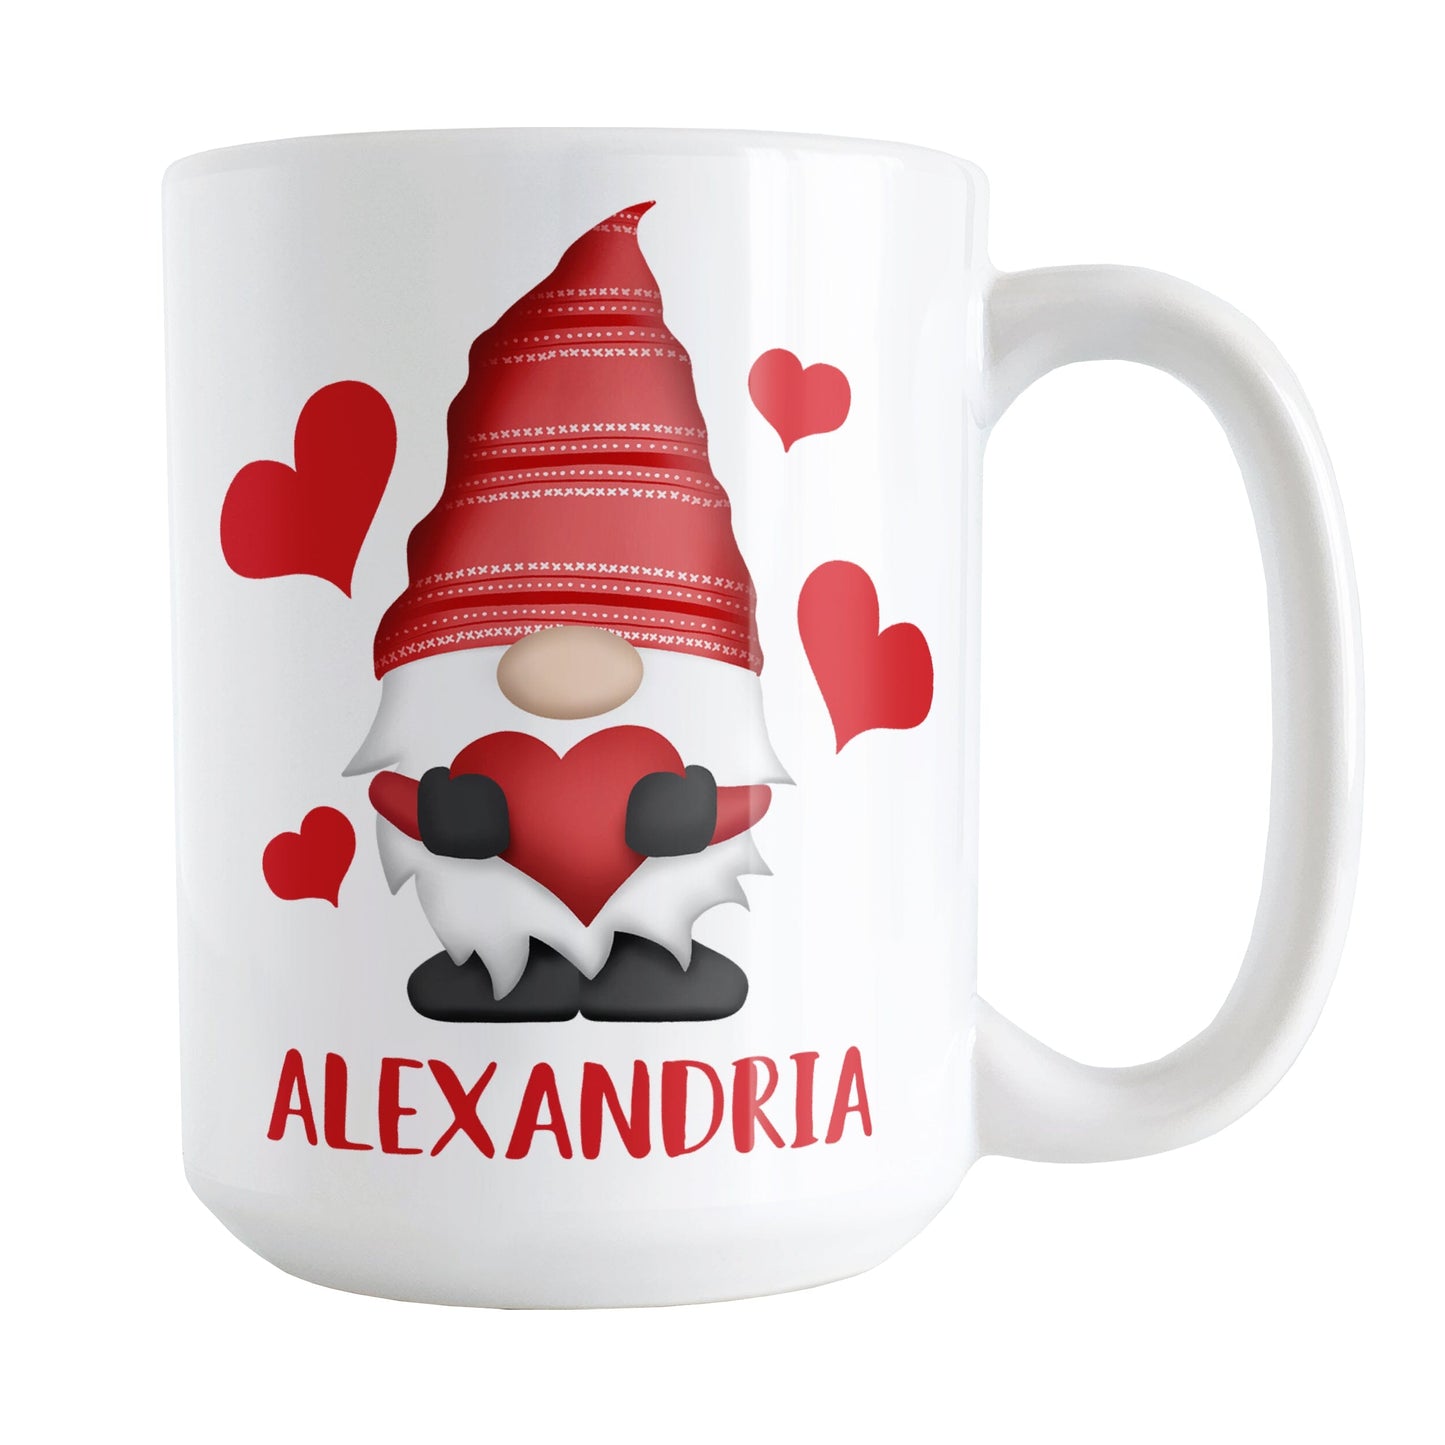 Personalized Red Heart Gnome Mug (15oz) at Amy's Coffee Mugs. A ceramic coffee mug designed with an illustration of an adorable gnome with a red pointed hat, holding a big red heart, with bold red hearts around it. Below the gnome is your personalized name custom printed in a cute red font. This charming gnome and personalized name are printed on both sides of the mug.